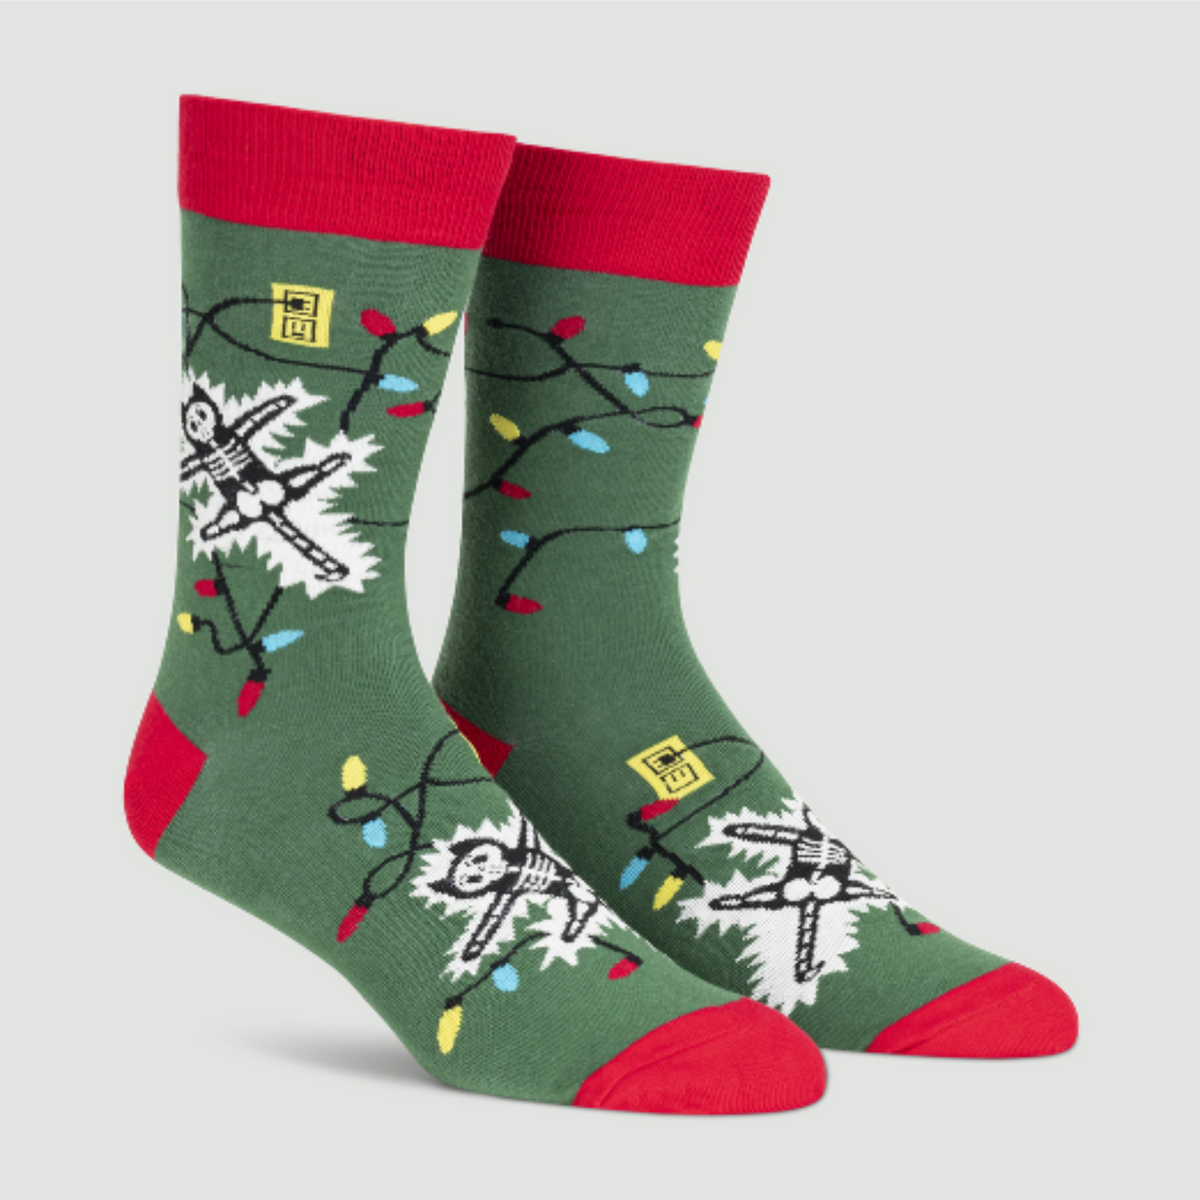 Sock It To Me Eating Light This Holiday (GLOWS IN THE DARK) women&#39;s and men&#39;s crew socks featuring green sock with red cuff, heel, and toe with cartoon cat being electrocuted by Christmas lights. Socks shown on display feet. 